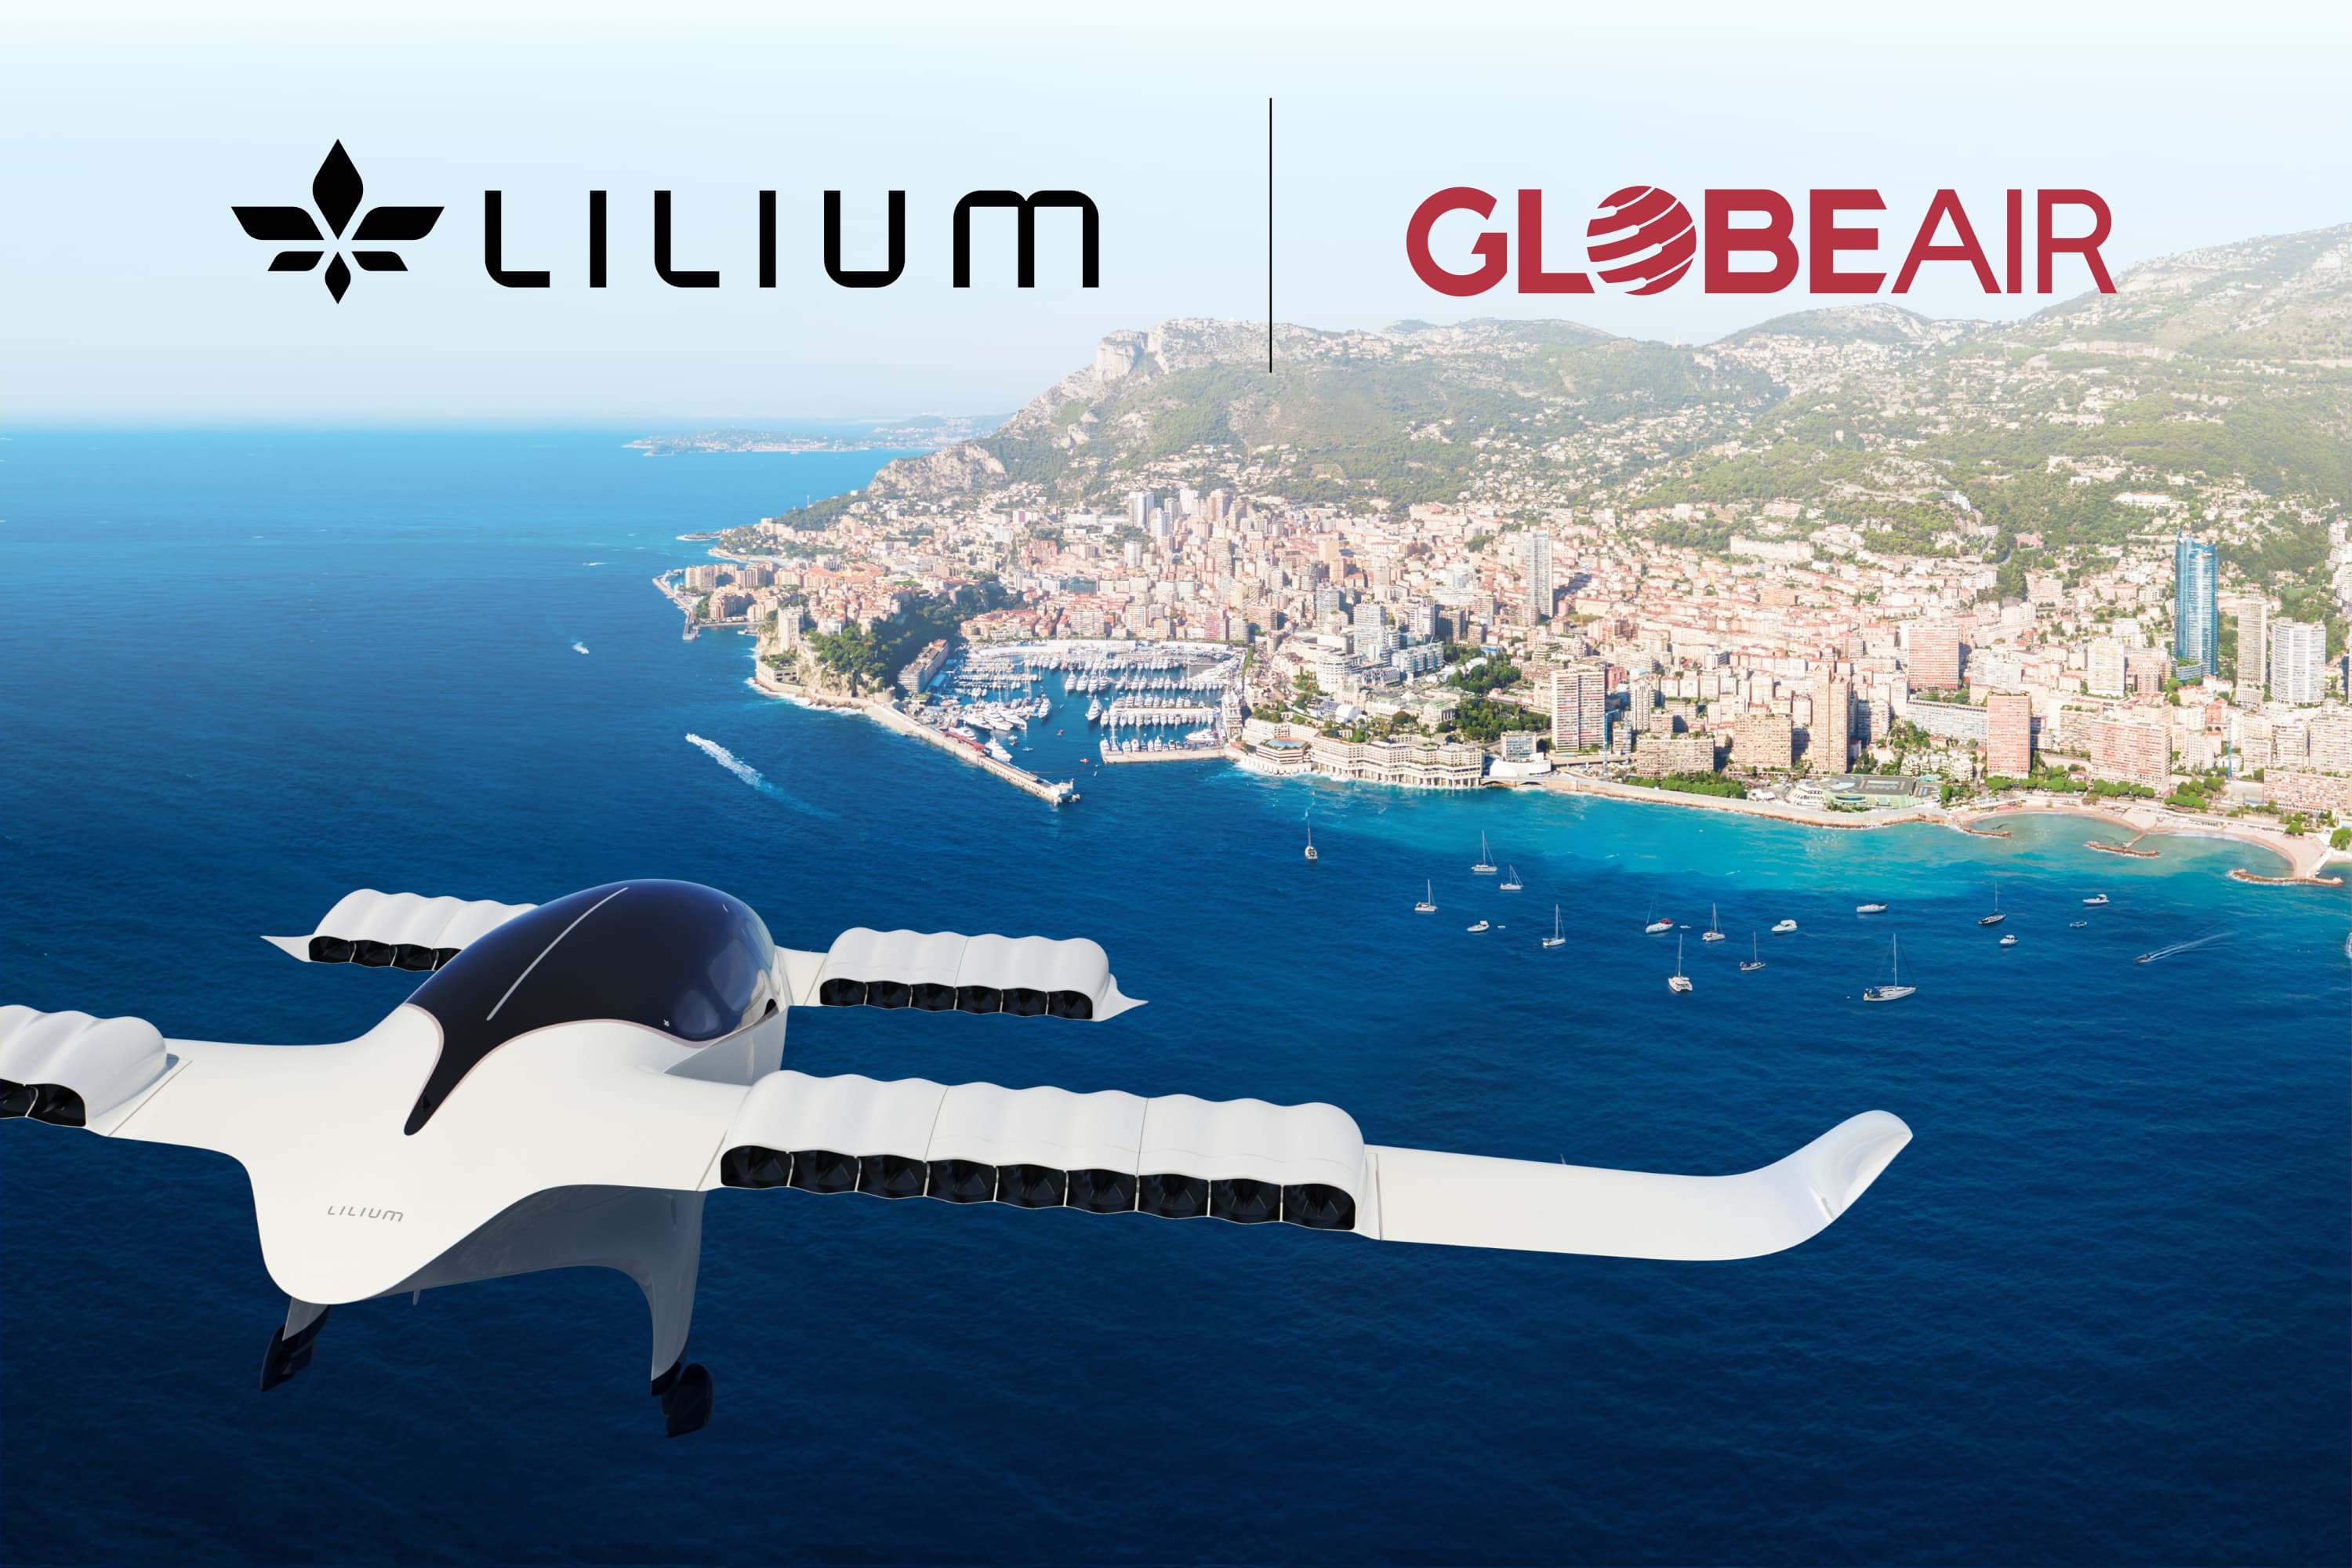 GlobeAir to serve Southern France and Italy with the Lilium Jet